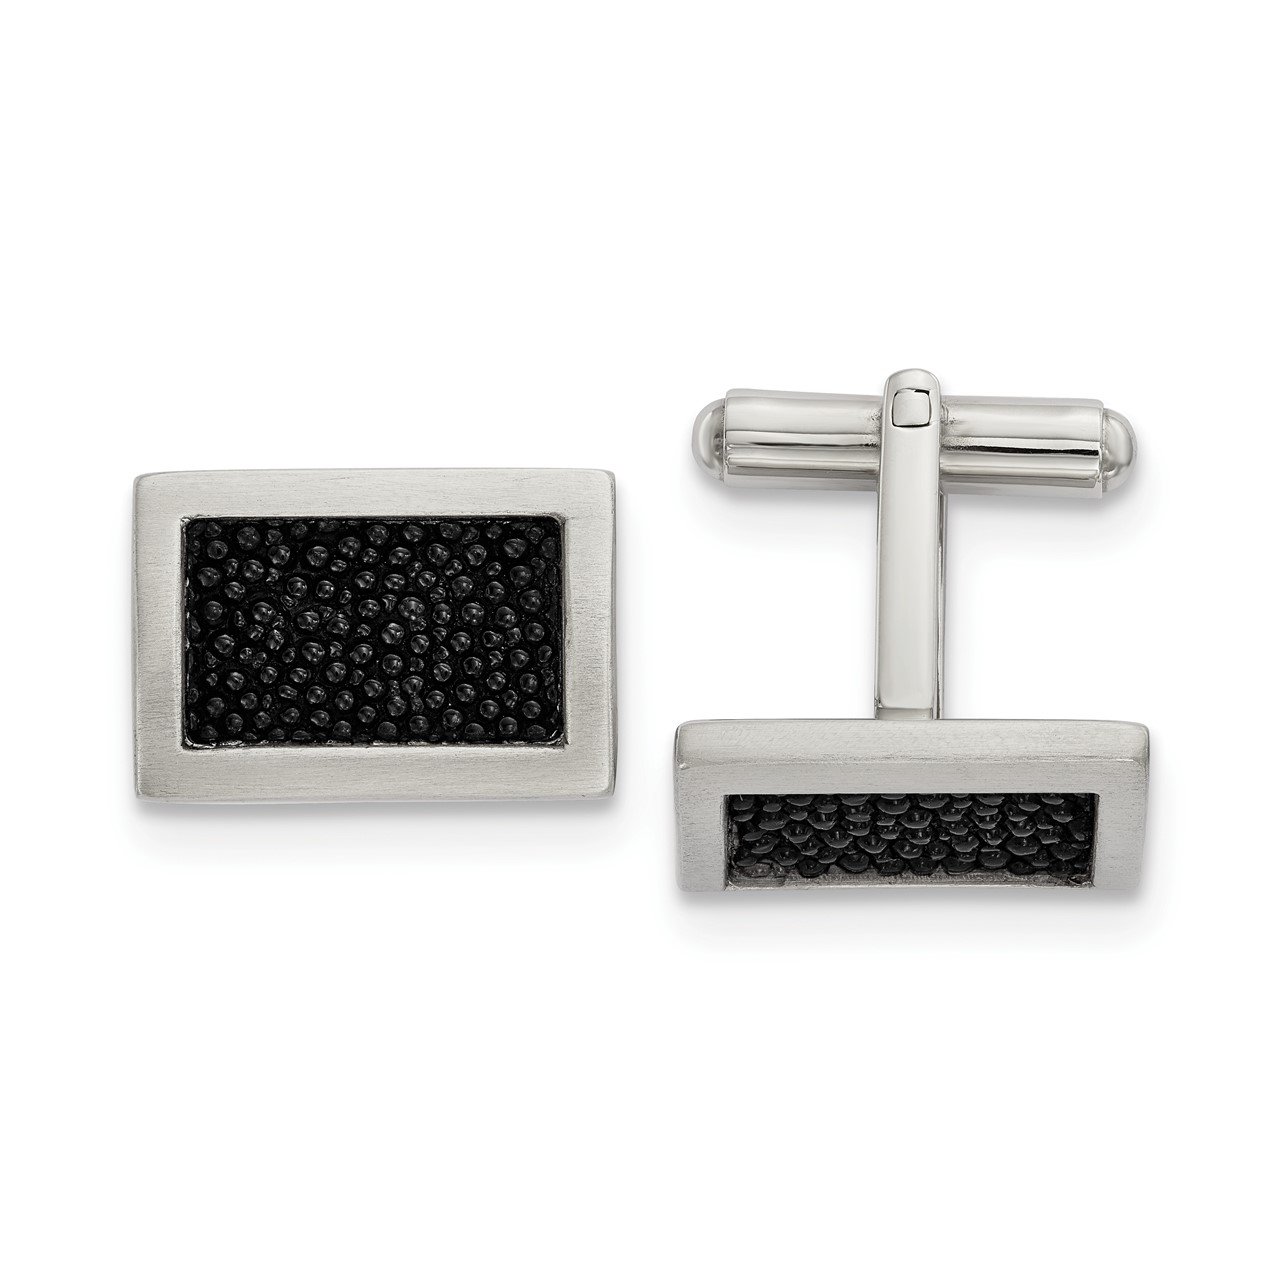 Stainless Steel Brushed with Stingray Leather Cufflinks